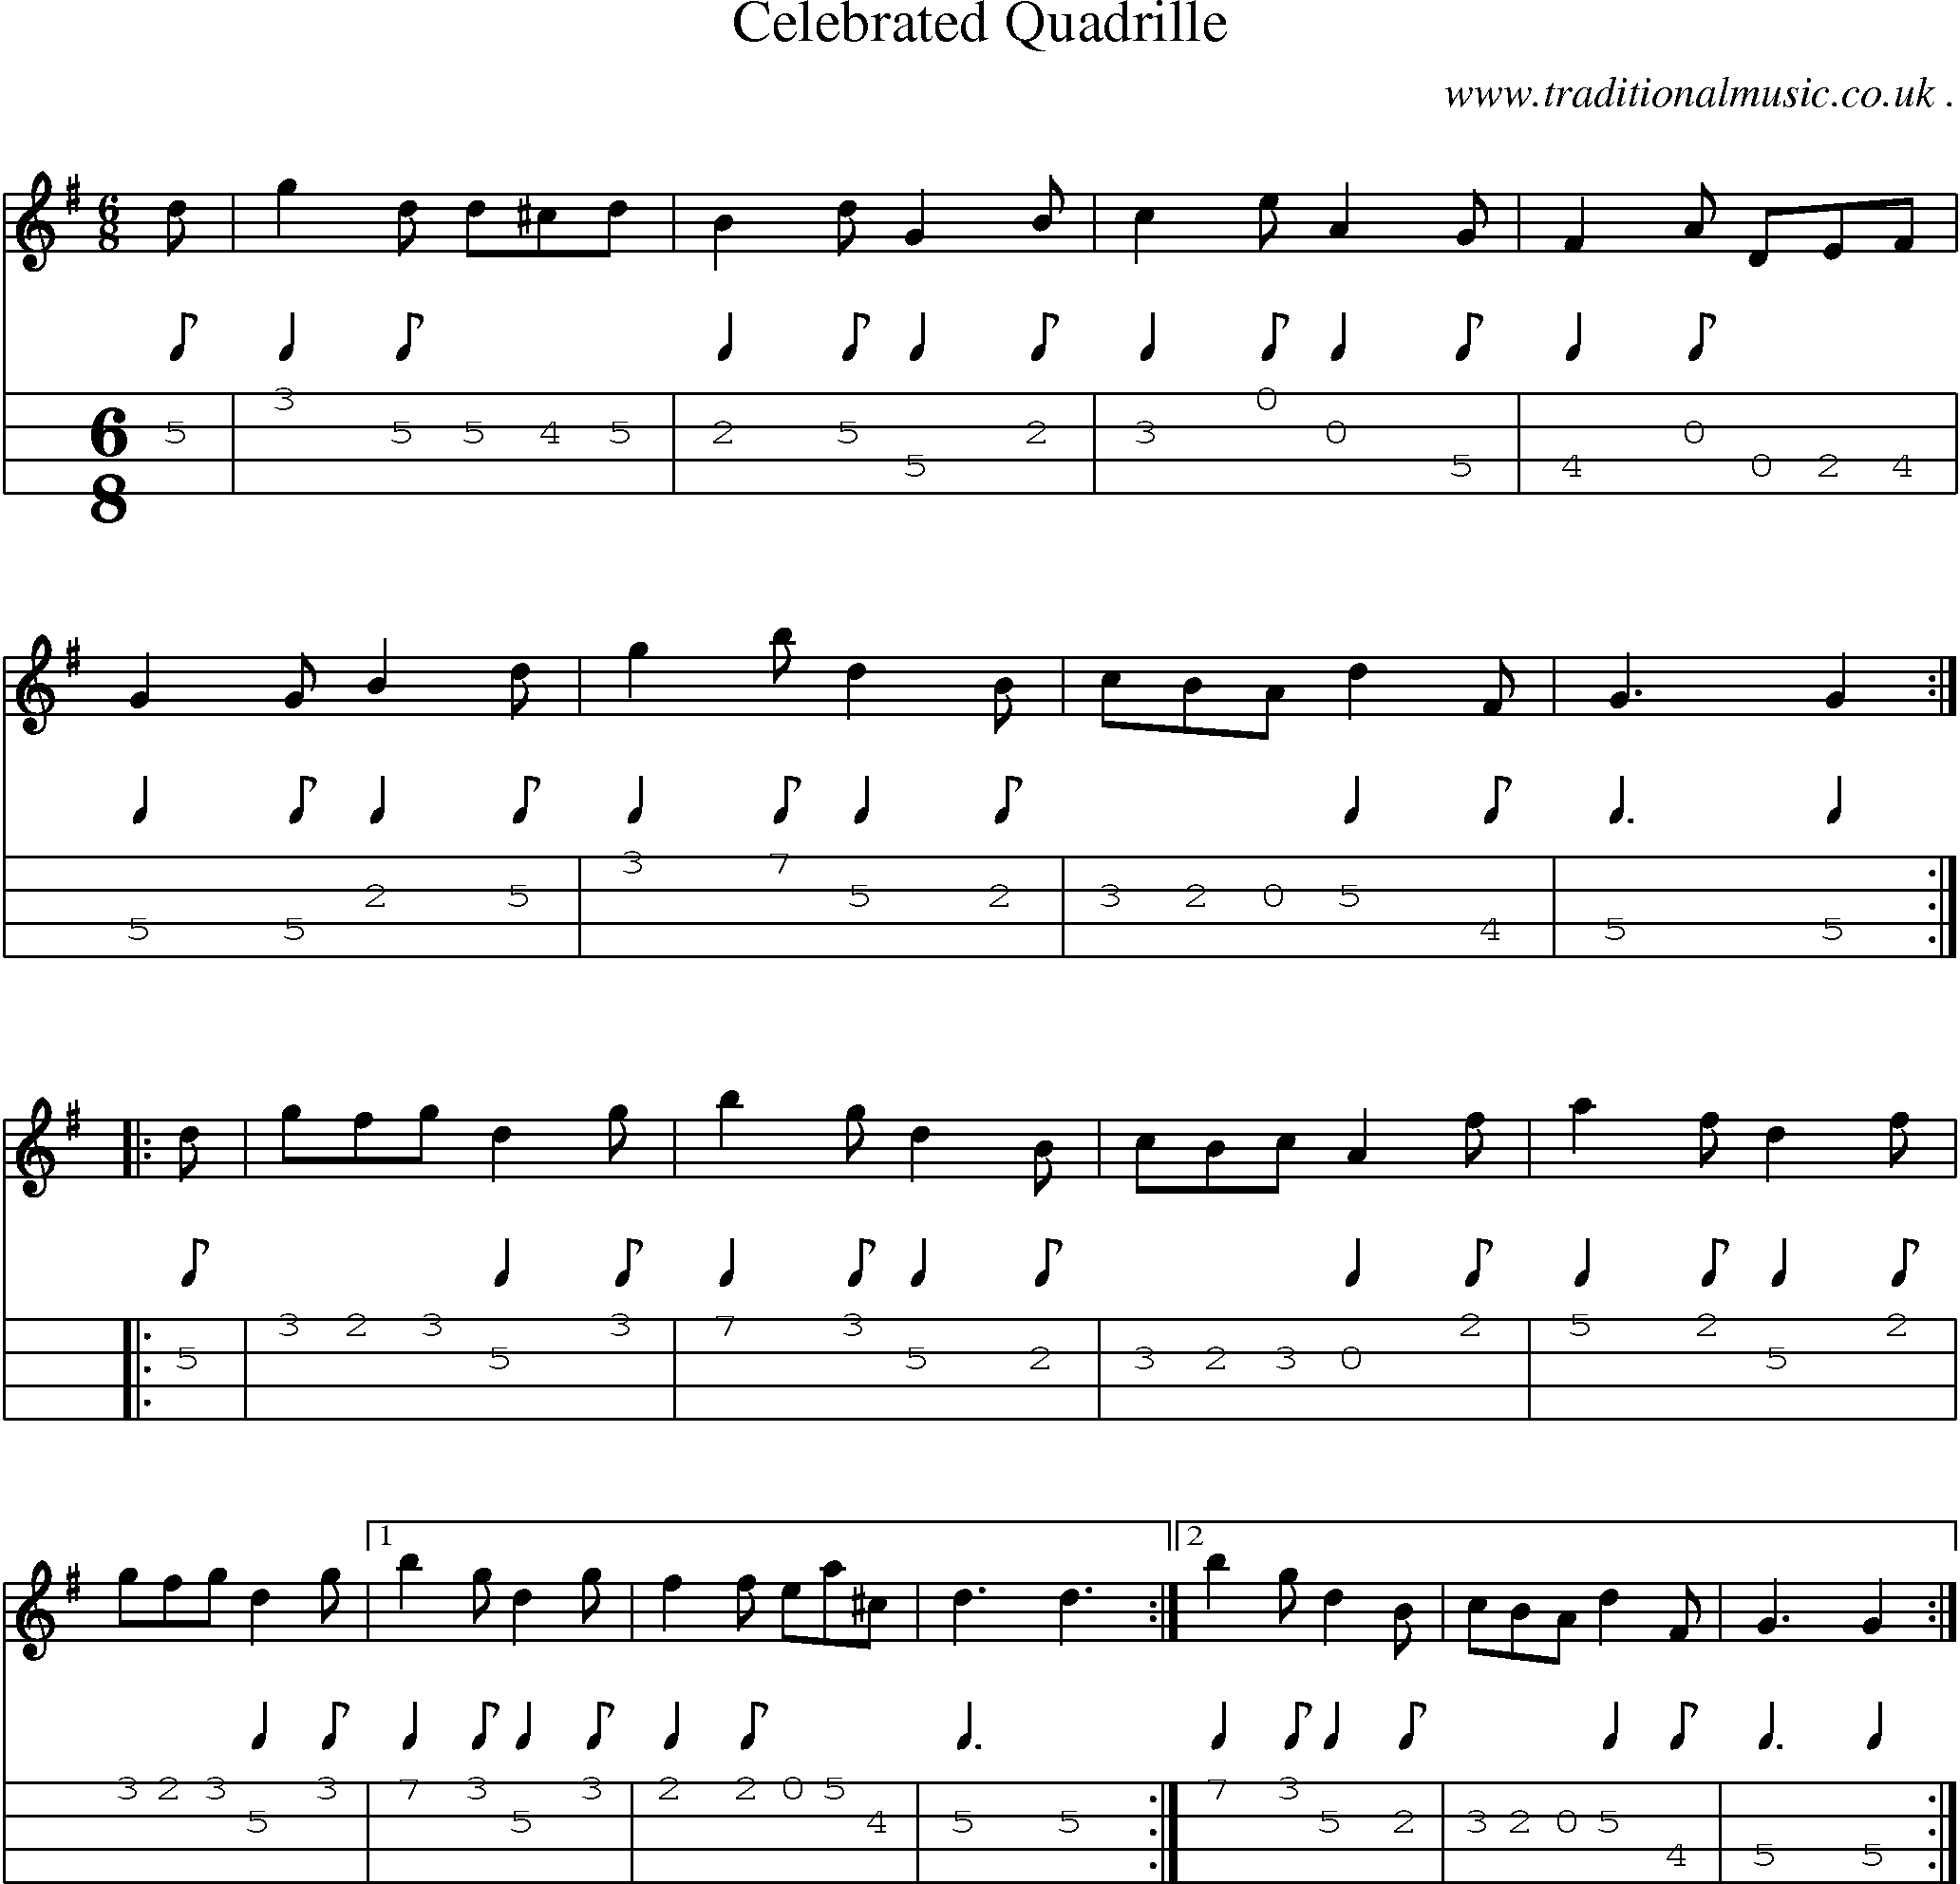 Sheet-Music and Mandolin Tabs for Celebrated Quadrille